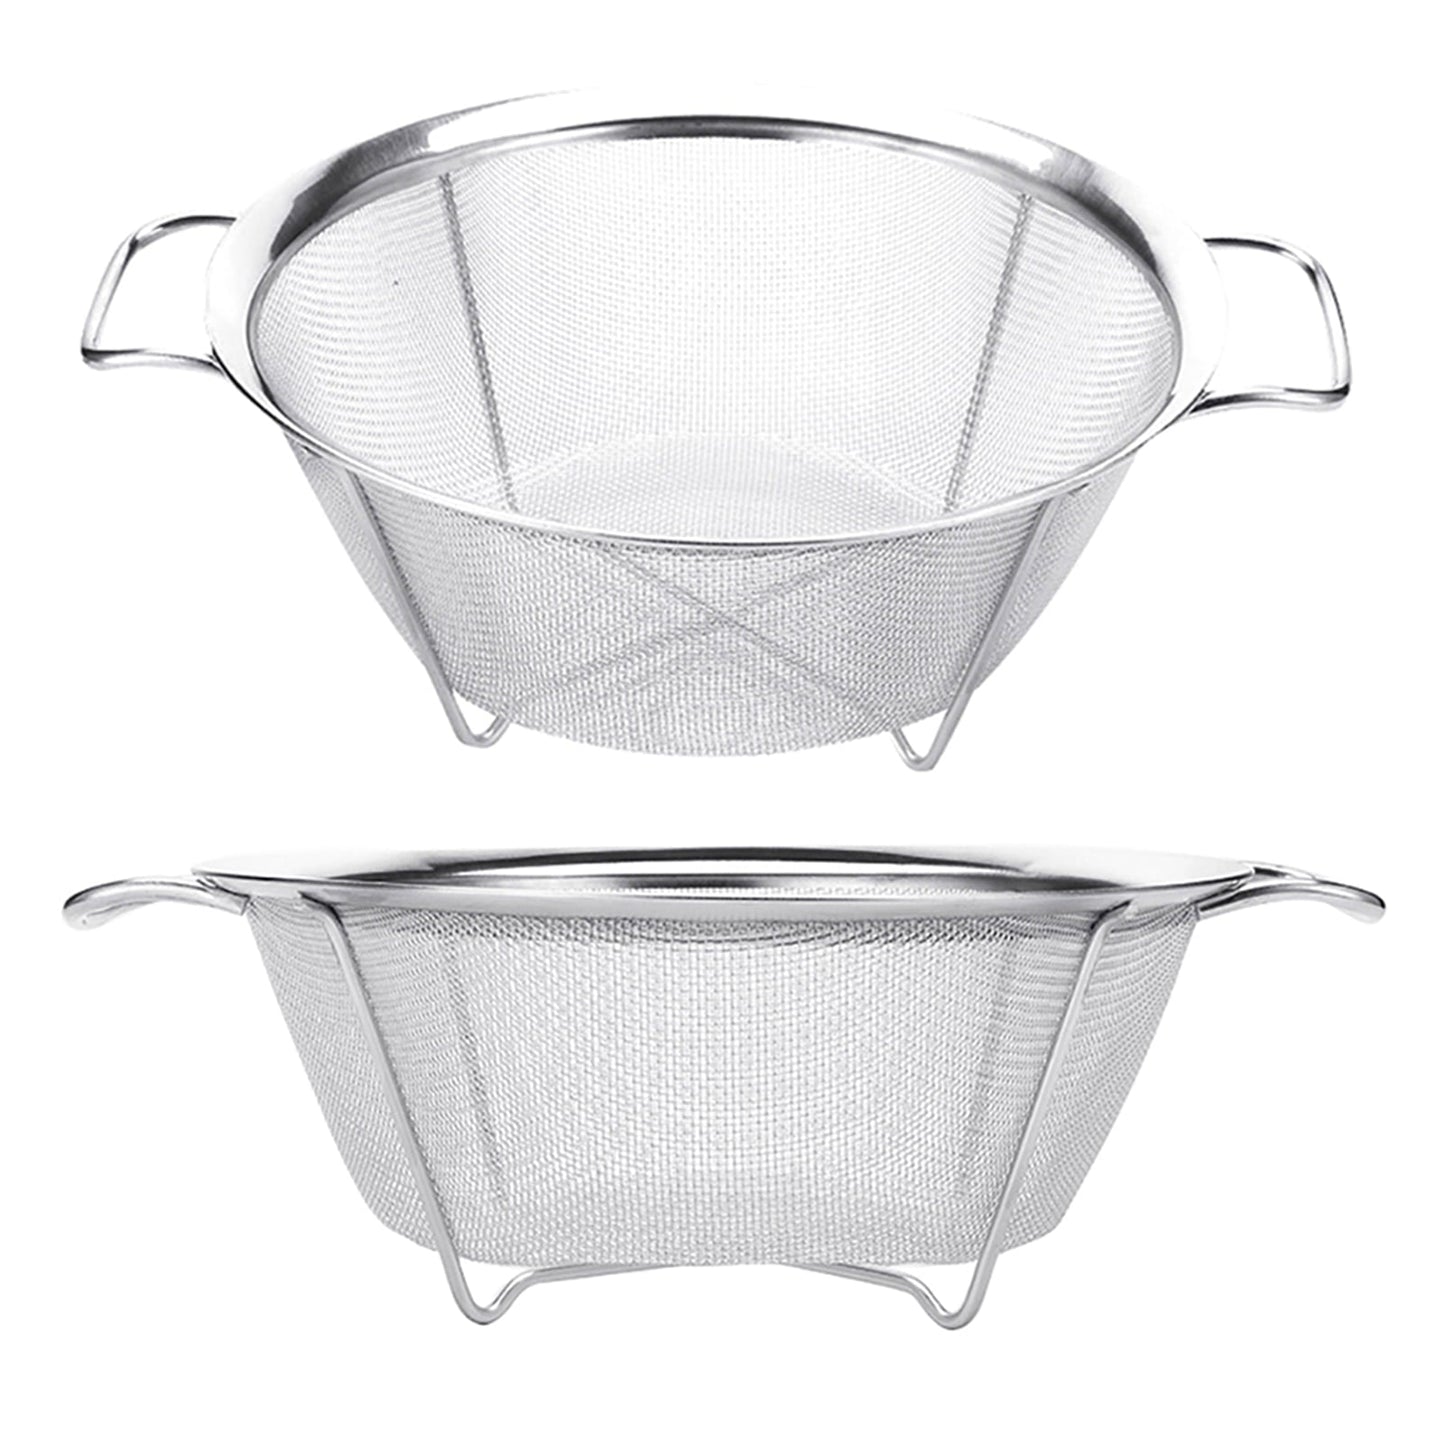 10" Stainless Steel Double Handles Strainer / Colander